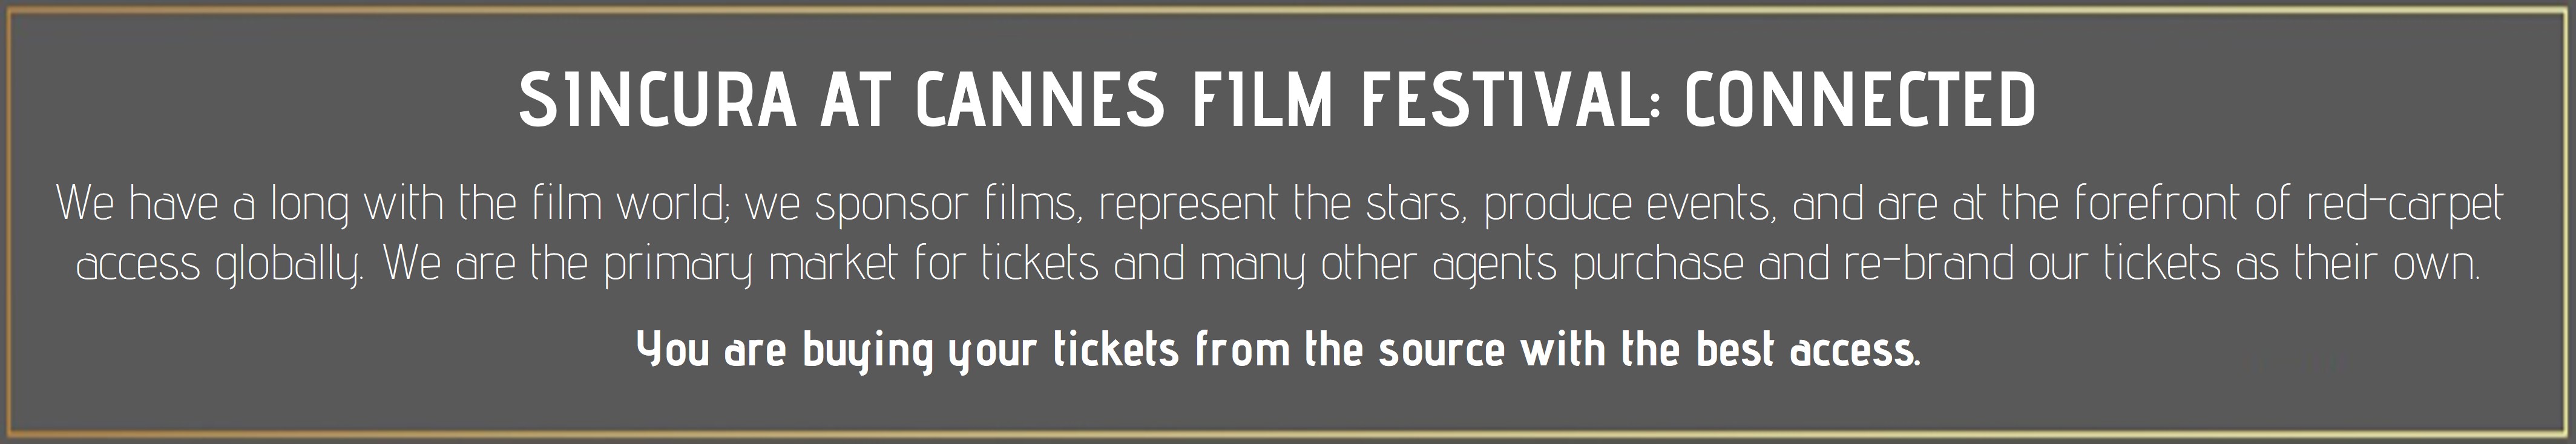 sincura are the must trusted ticket supplier at cannes